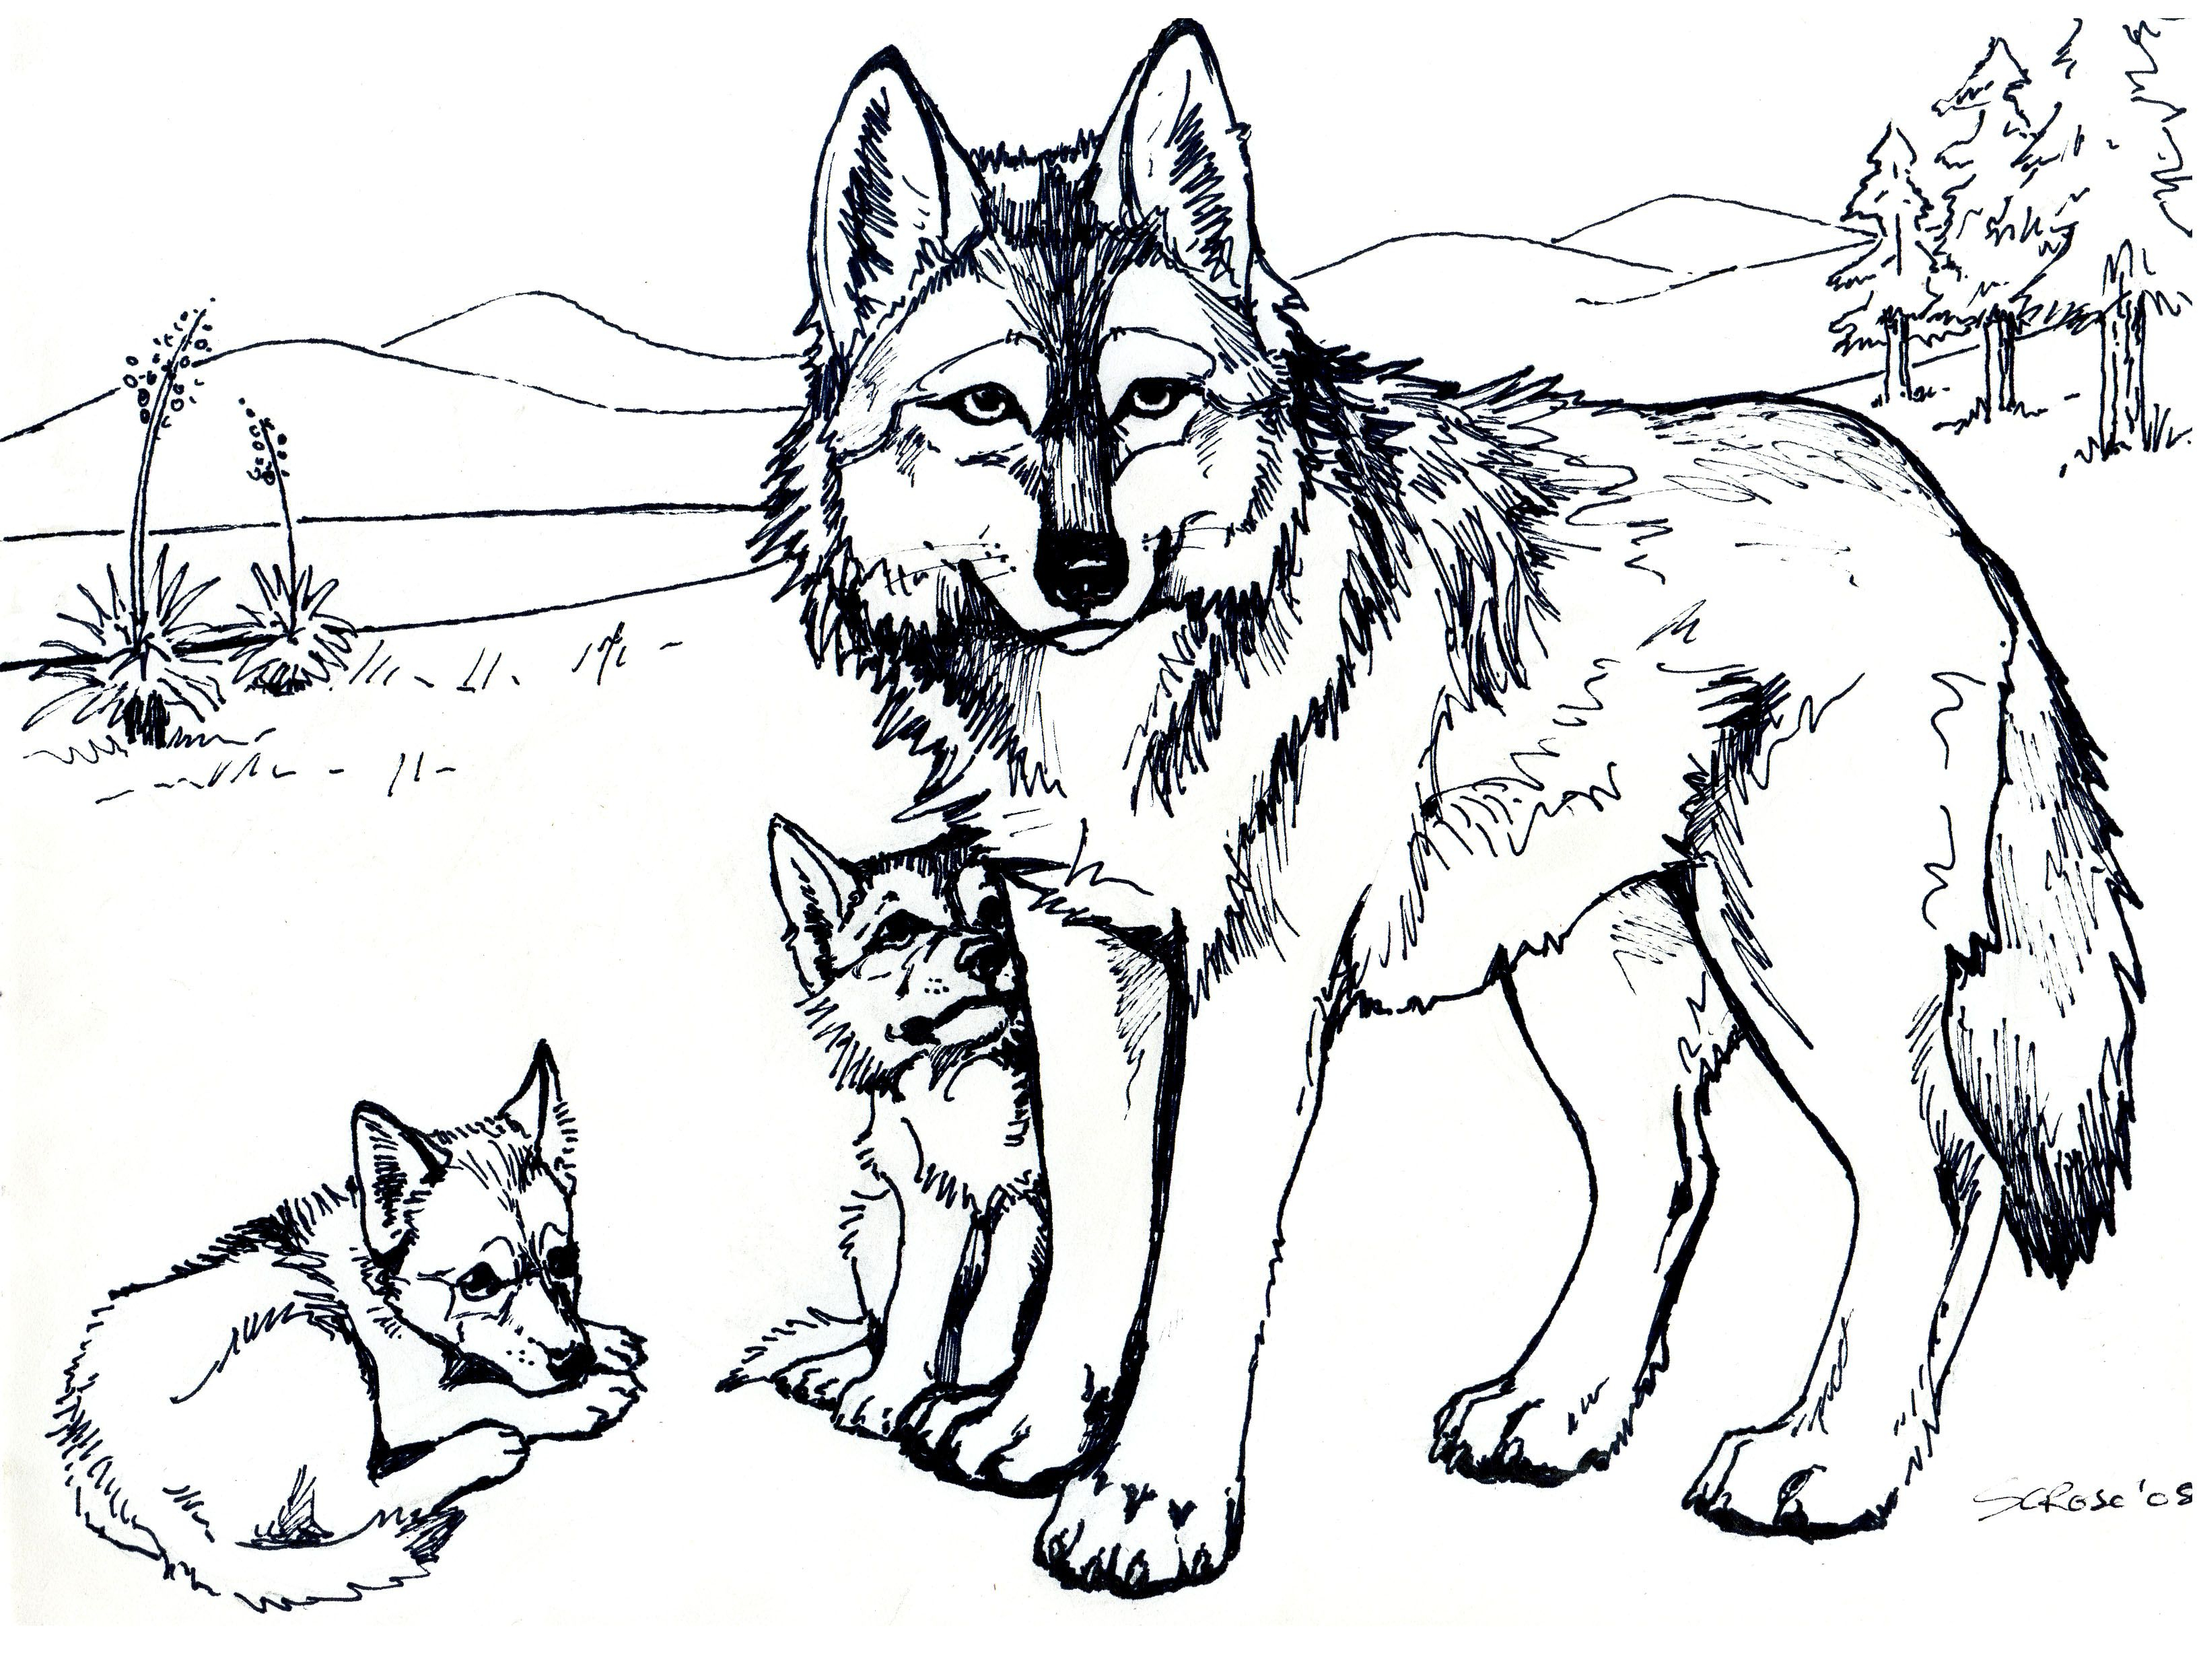 Free Printable Wolf Coloring Pages For Kids | Eden | Pinterest - Free Printable Realistic Animal Coloring Pages